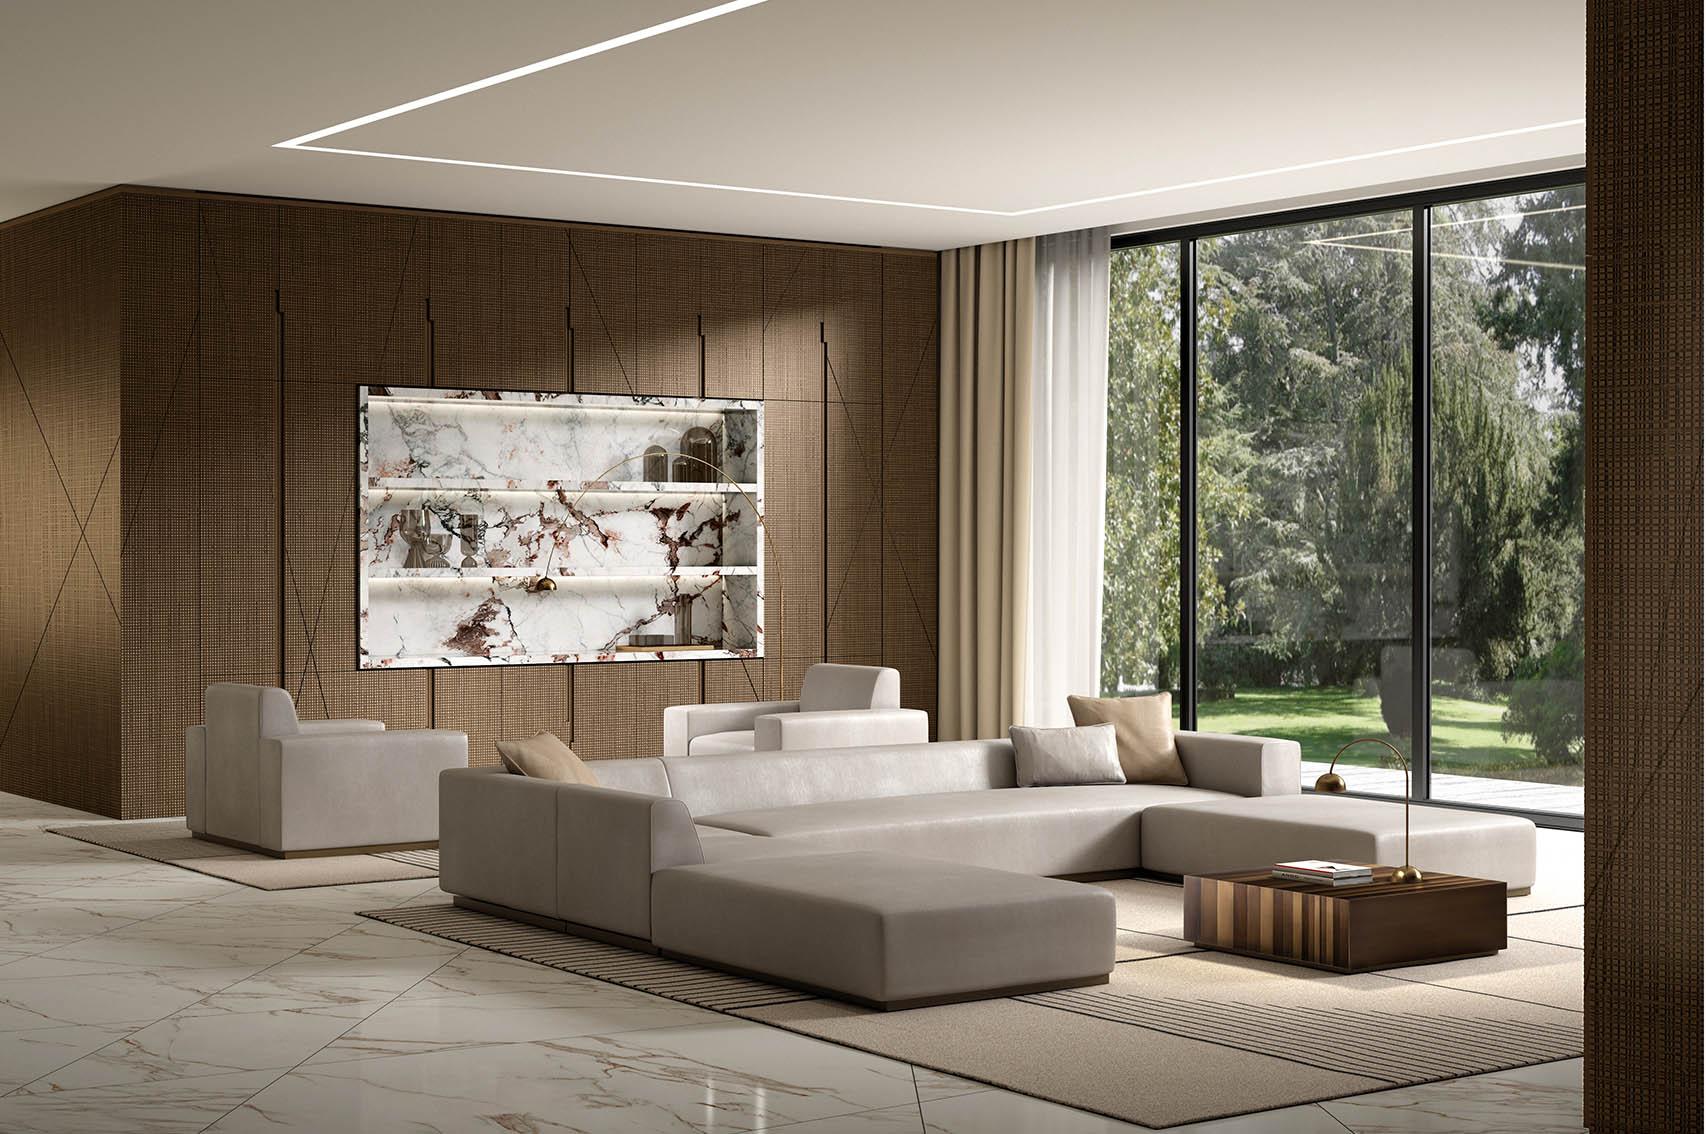 laurameroni day systems in wood, metal, fabric, marble to furnish modern livingrooms with custom made wardrobes